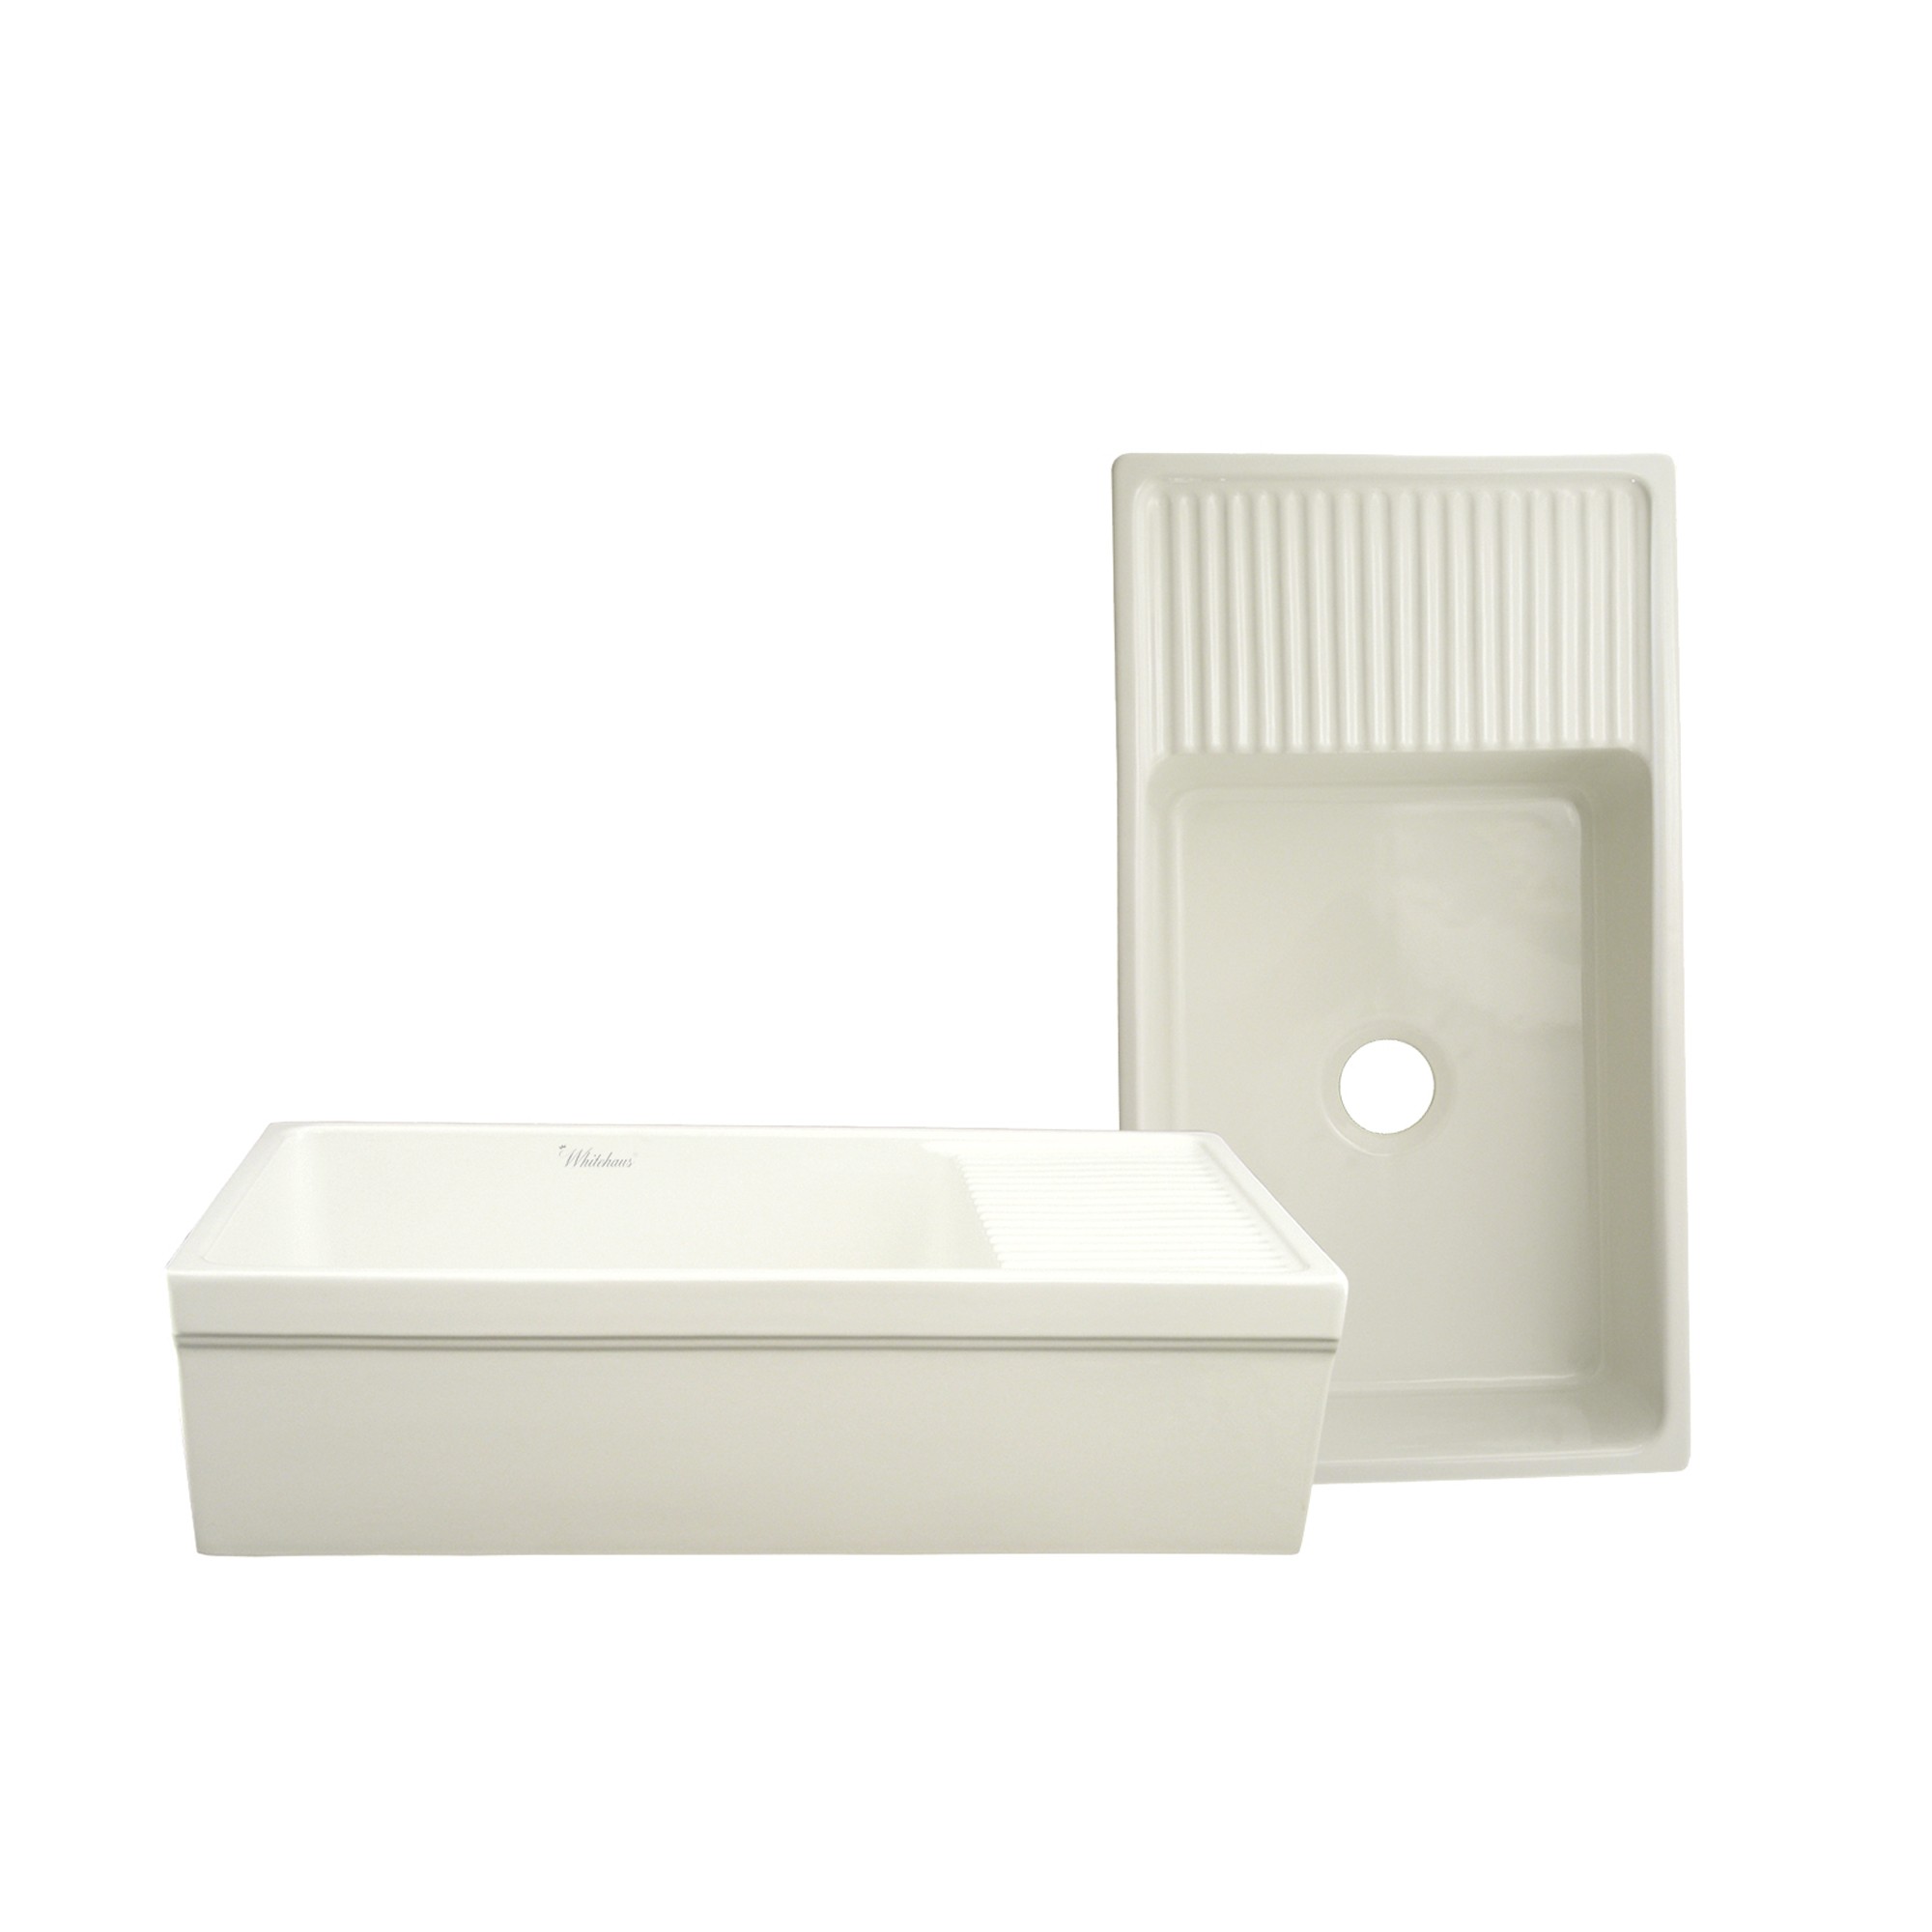 Farmhaus Fireclay Quatro Alcove Large Reversible Sink with Integral Drainboard and Decorative 2 +" Lip on Both Sides